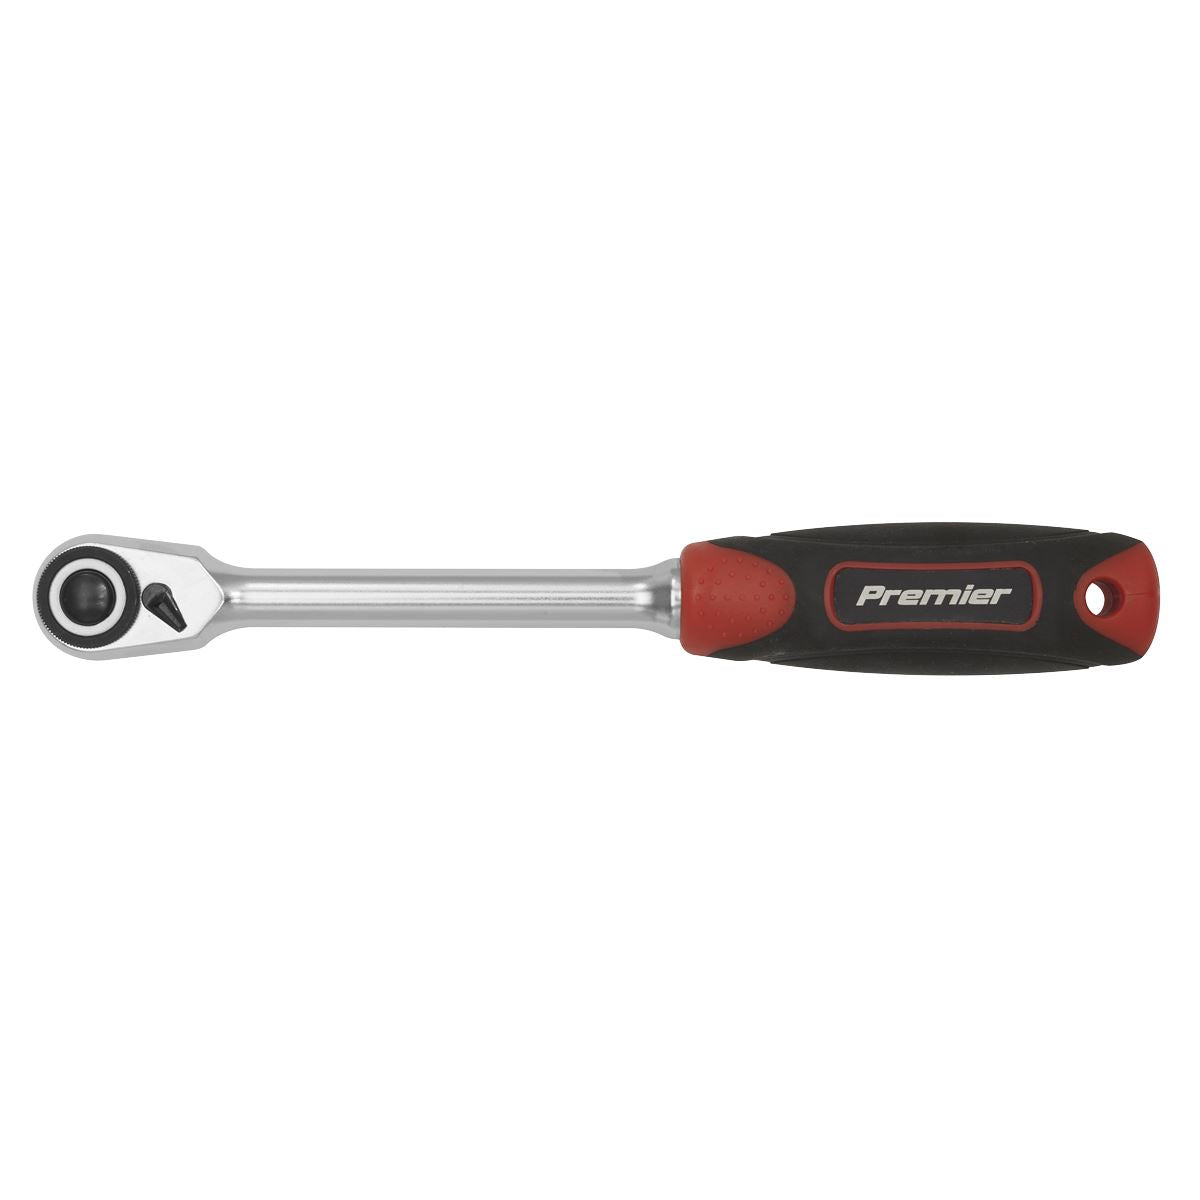 Sealey Compact Head Ratchet Wrench 3/8"Sq Drive - Platinum Series AK8988